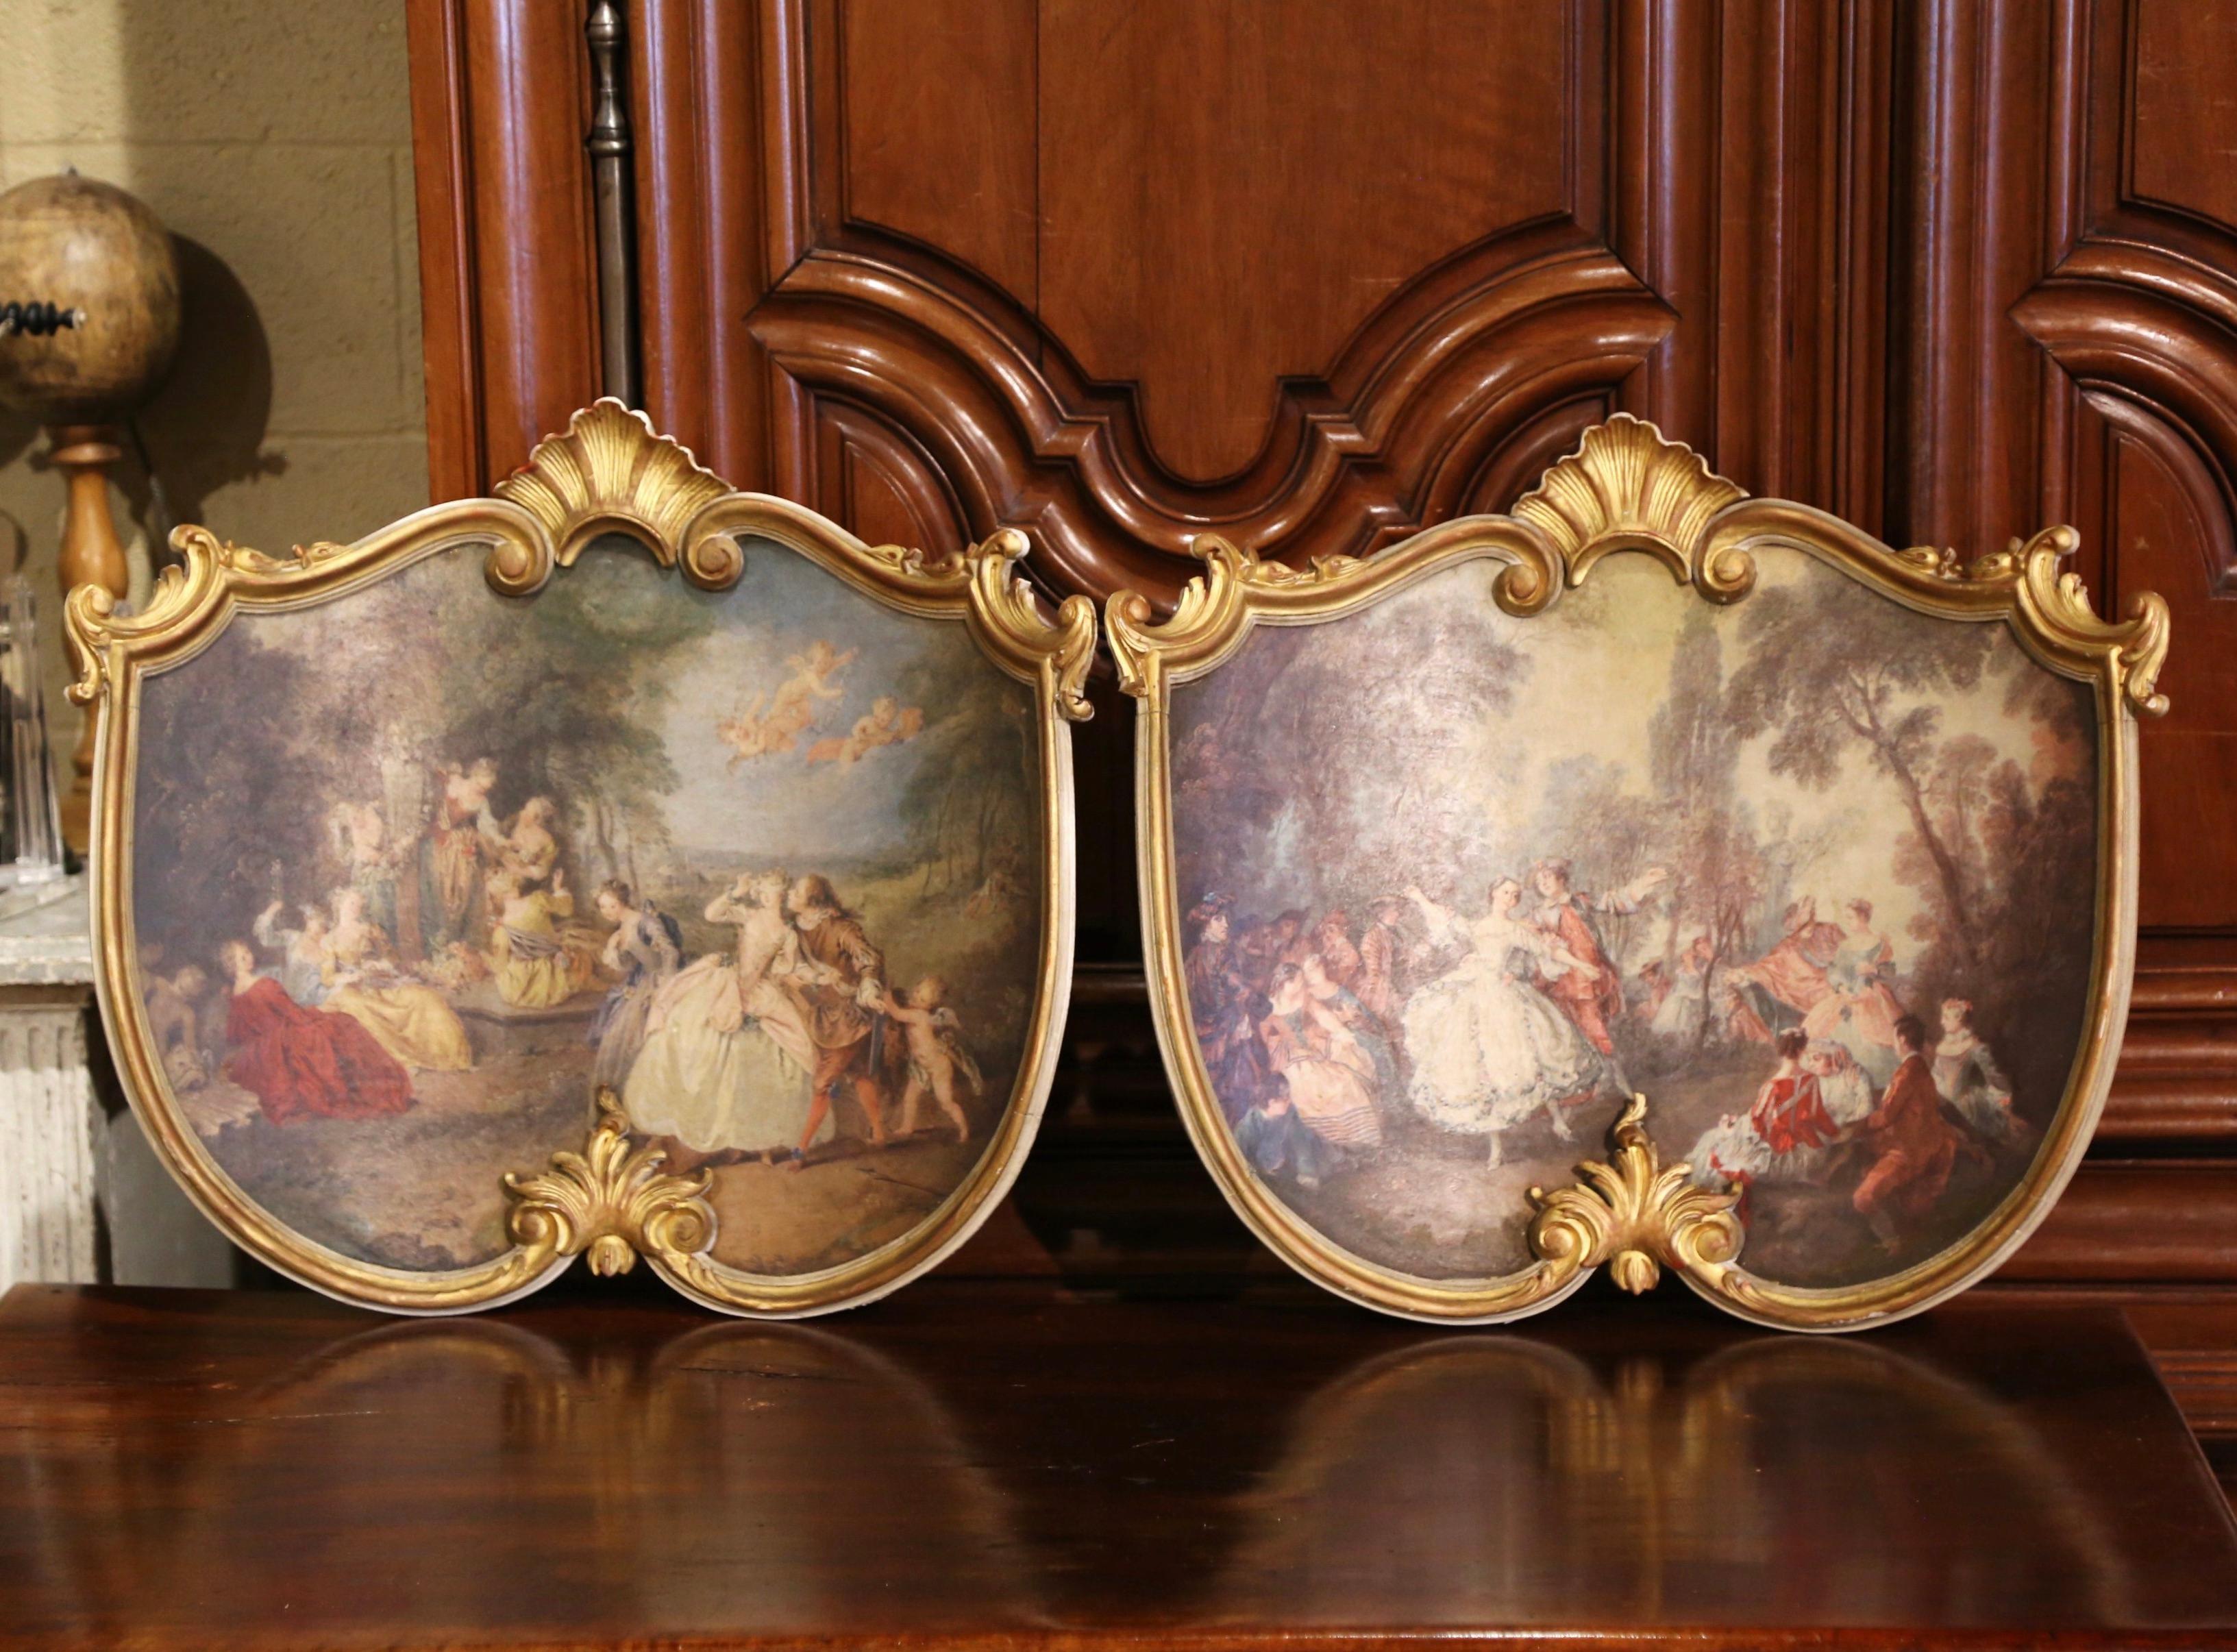 Giltwood Pair of 19th Century French Carved and Painted Pastoral Scenes Wall Plaques